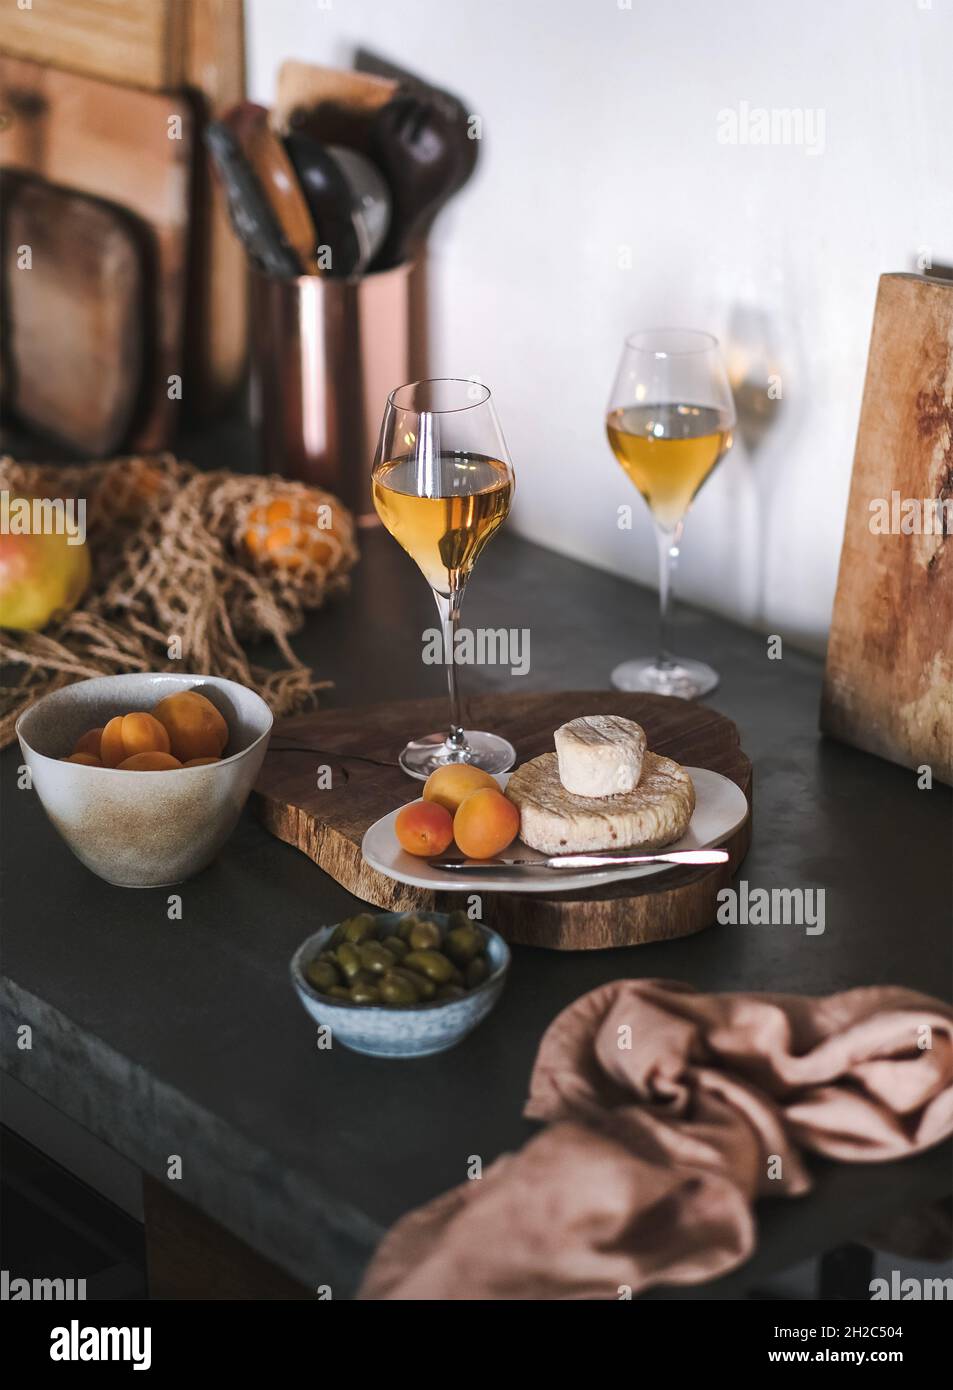 Orange wine in glasses, fruits and cheese on wooden board Stock Photo